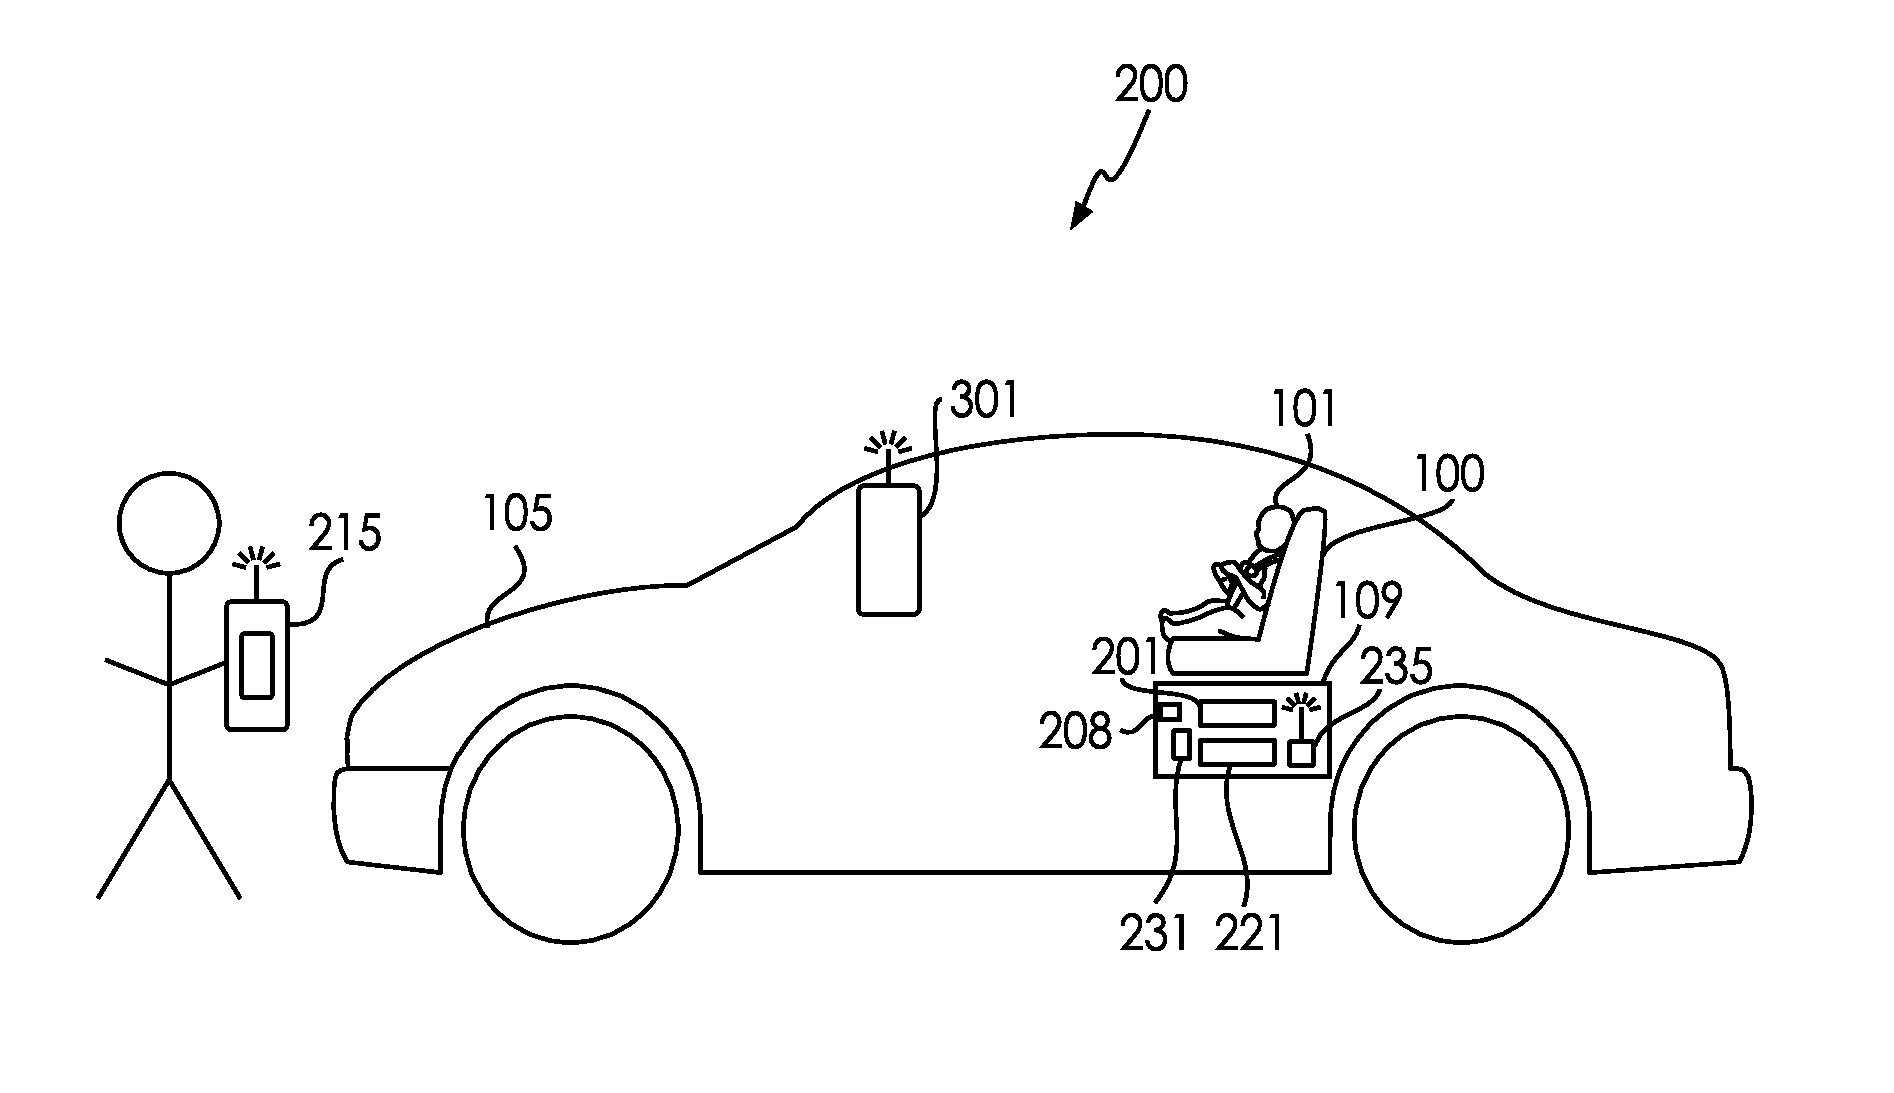 Systems and Methods for Indicating the Presence of a Child in a Vehicle